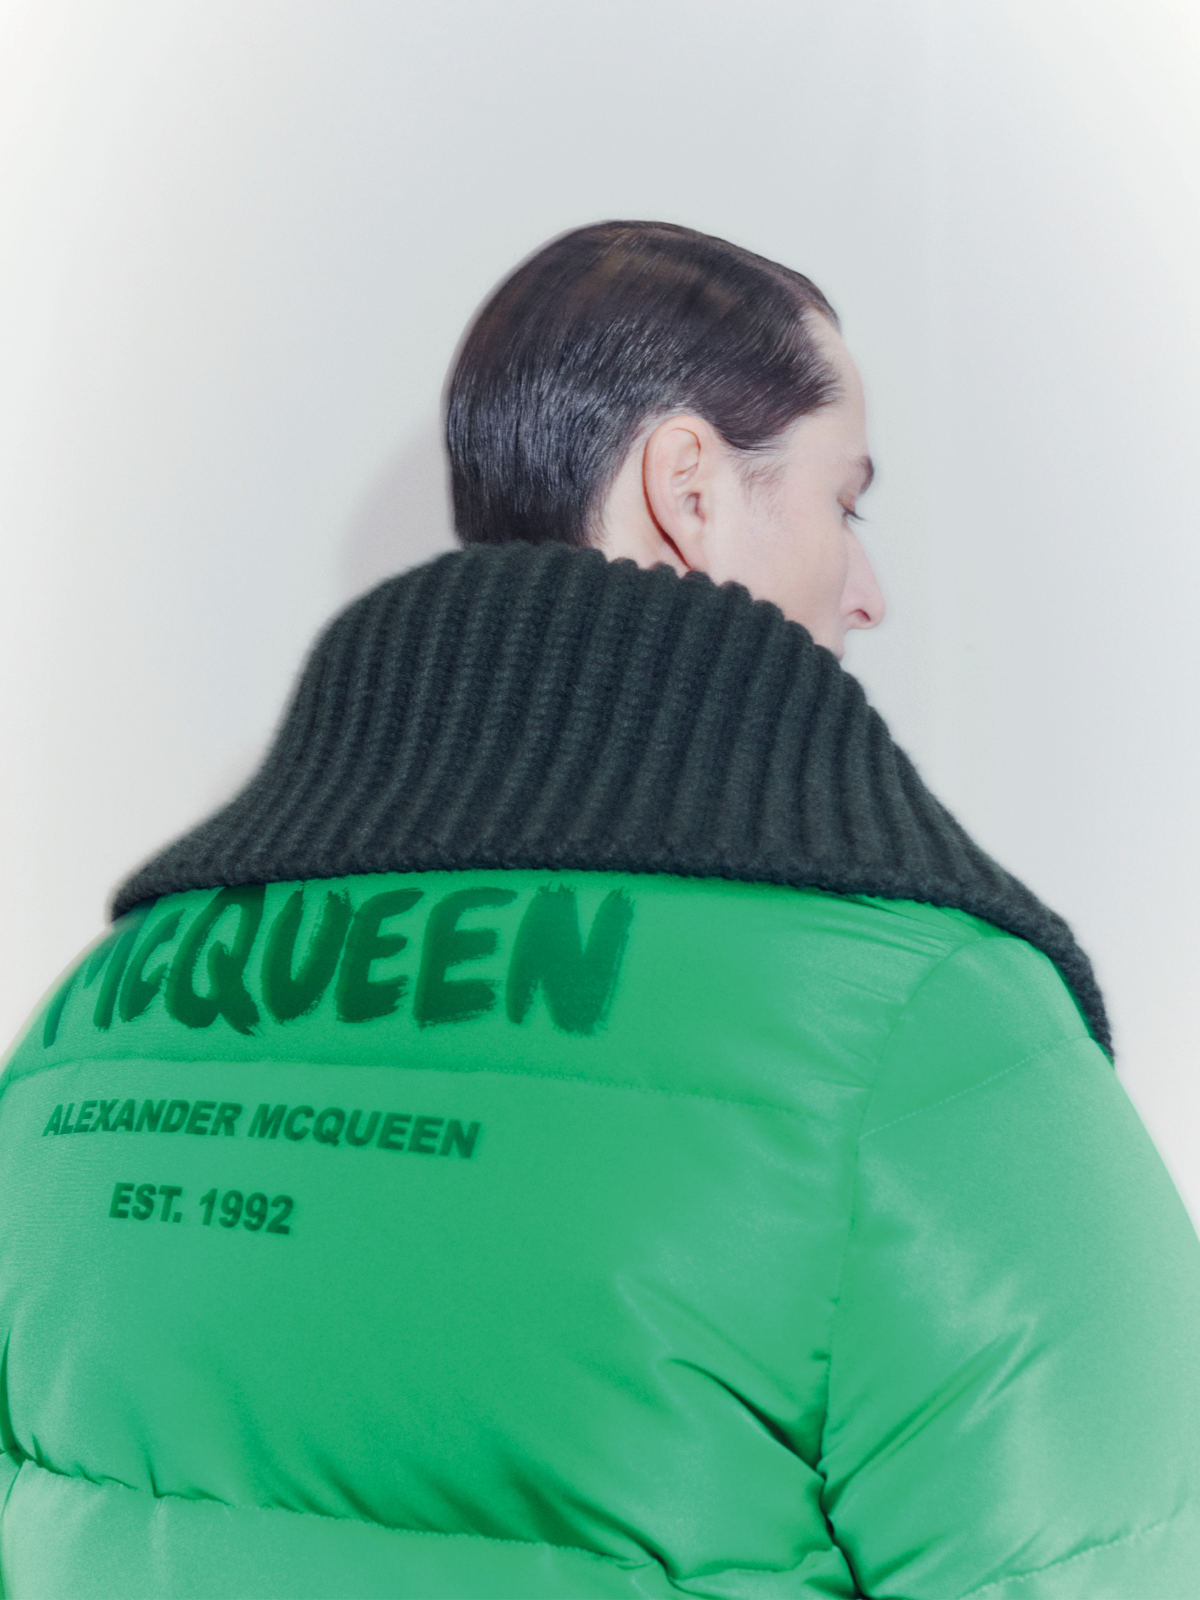 Alexander McQueen Introduces Its New Autumn Winter 2021 Menswear Collection